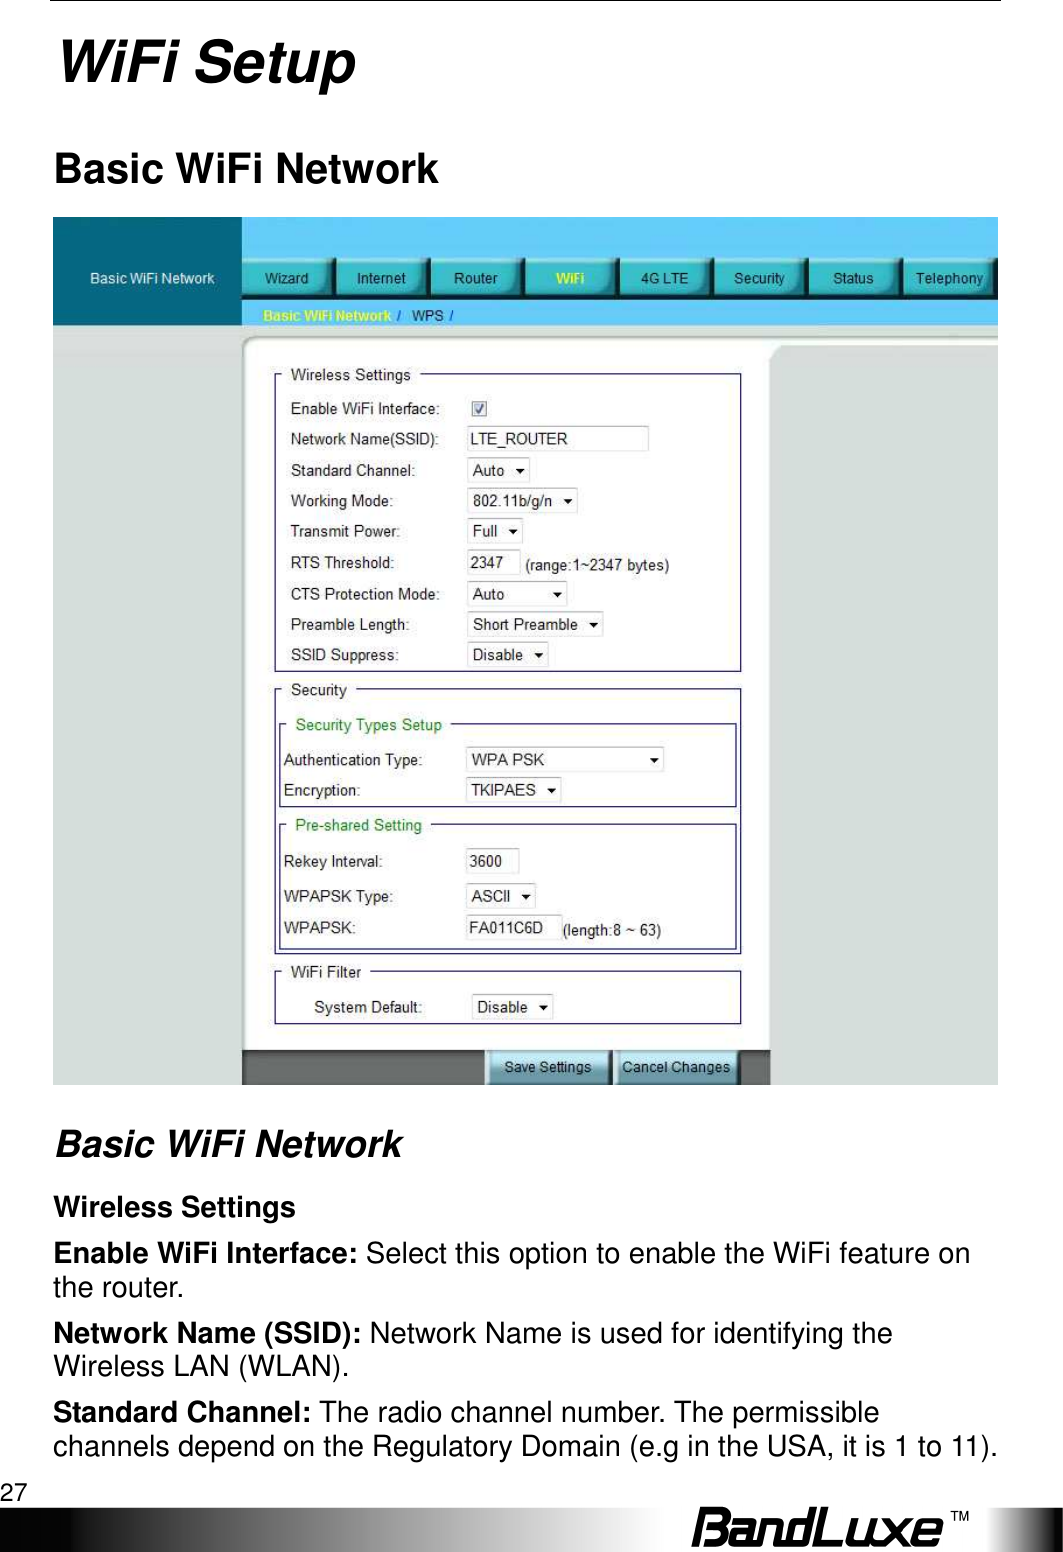   WiFi Setup 27 WiFi Setup Basic WiFi Network  Basic WiFi Network Wireless Settings Enable WiFi Interface: Select this option to enable the WiFi feature on the router. Network Name (SSID): Network Name is used for identifying the Wireless LAN (WLAN). Standard Channel: The radio channel number. The permissible channels depend on the Regulatory Domain (e.g in the USA, it is 1 to 11). 